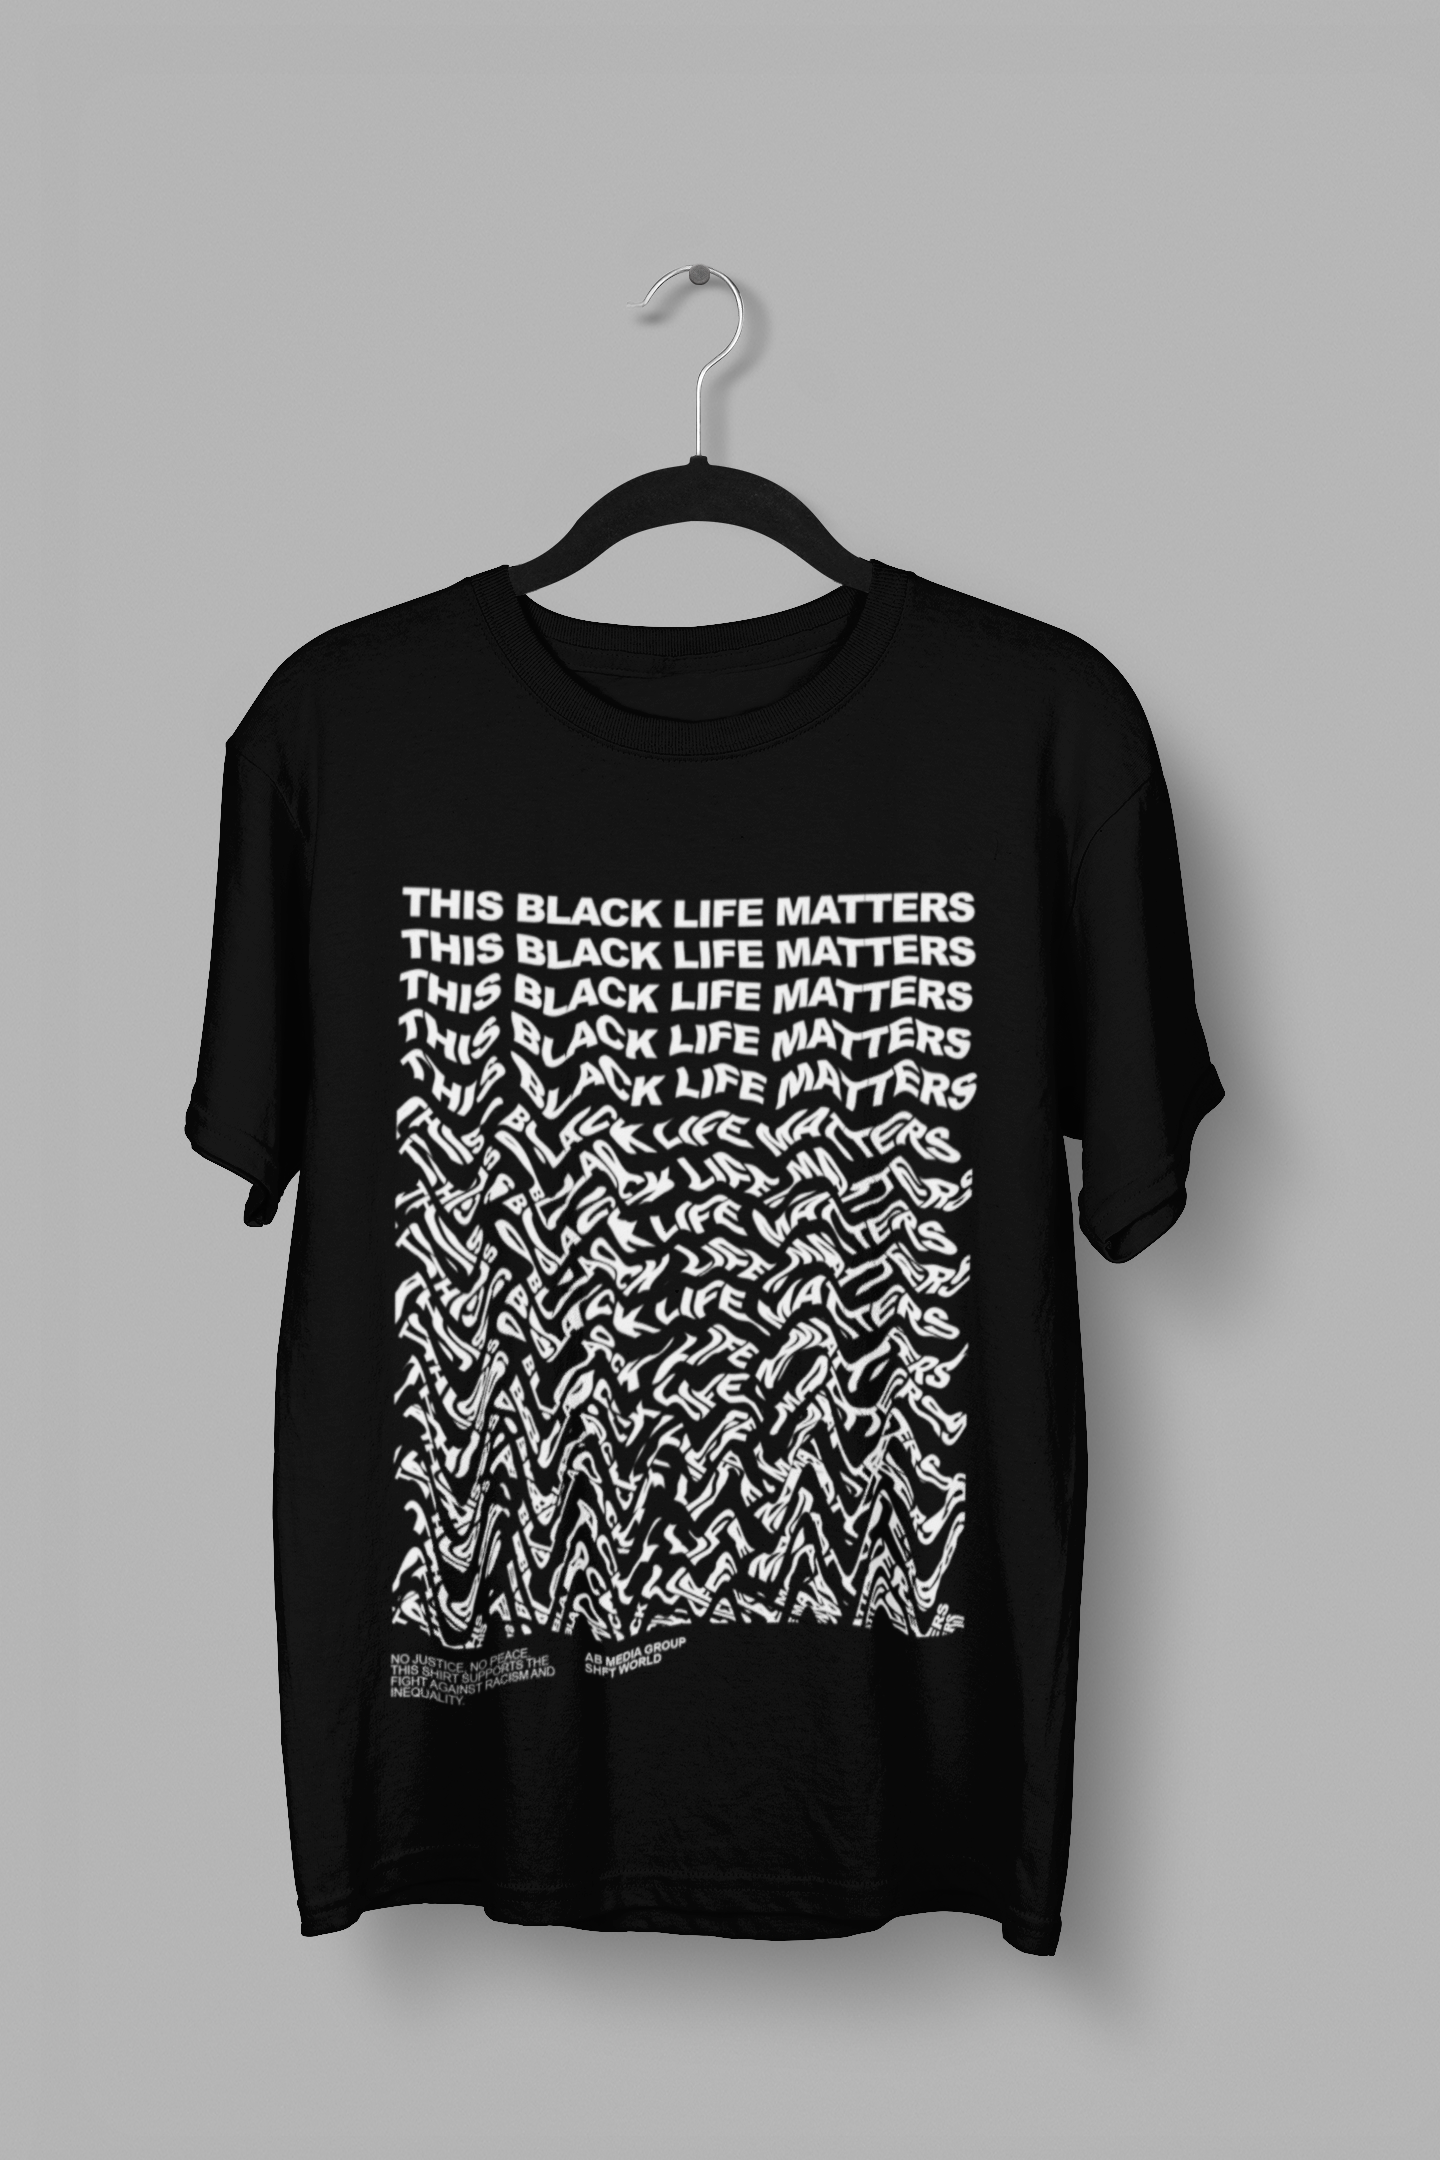 4 Black Lives Matter IRON ON FREE SHIPPING FREE GIFTS 